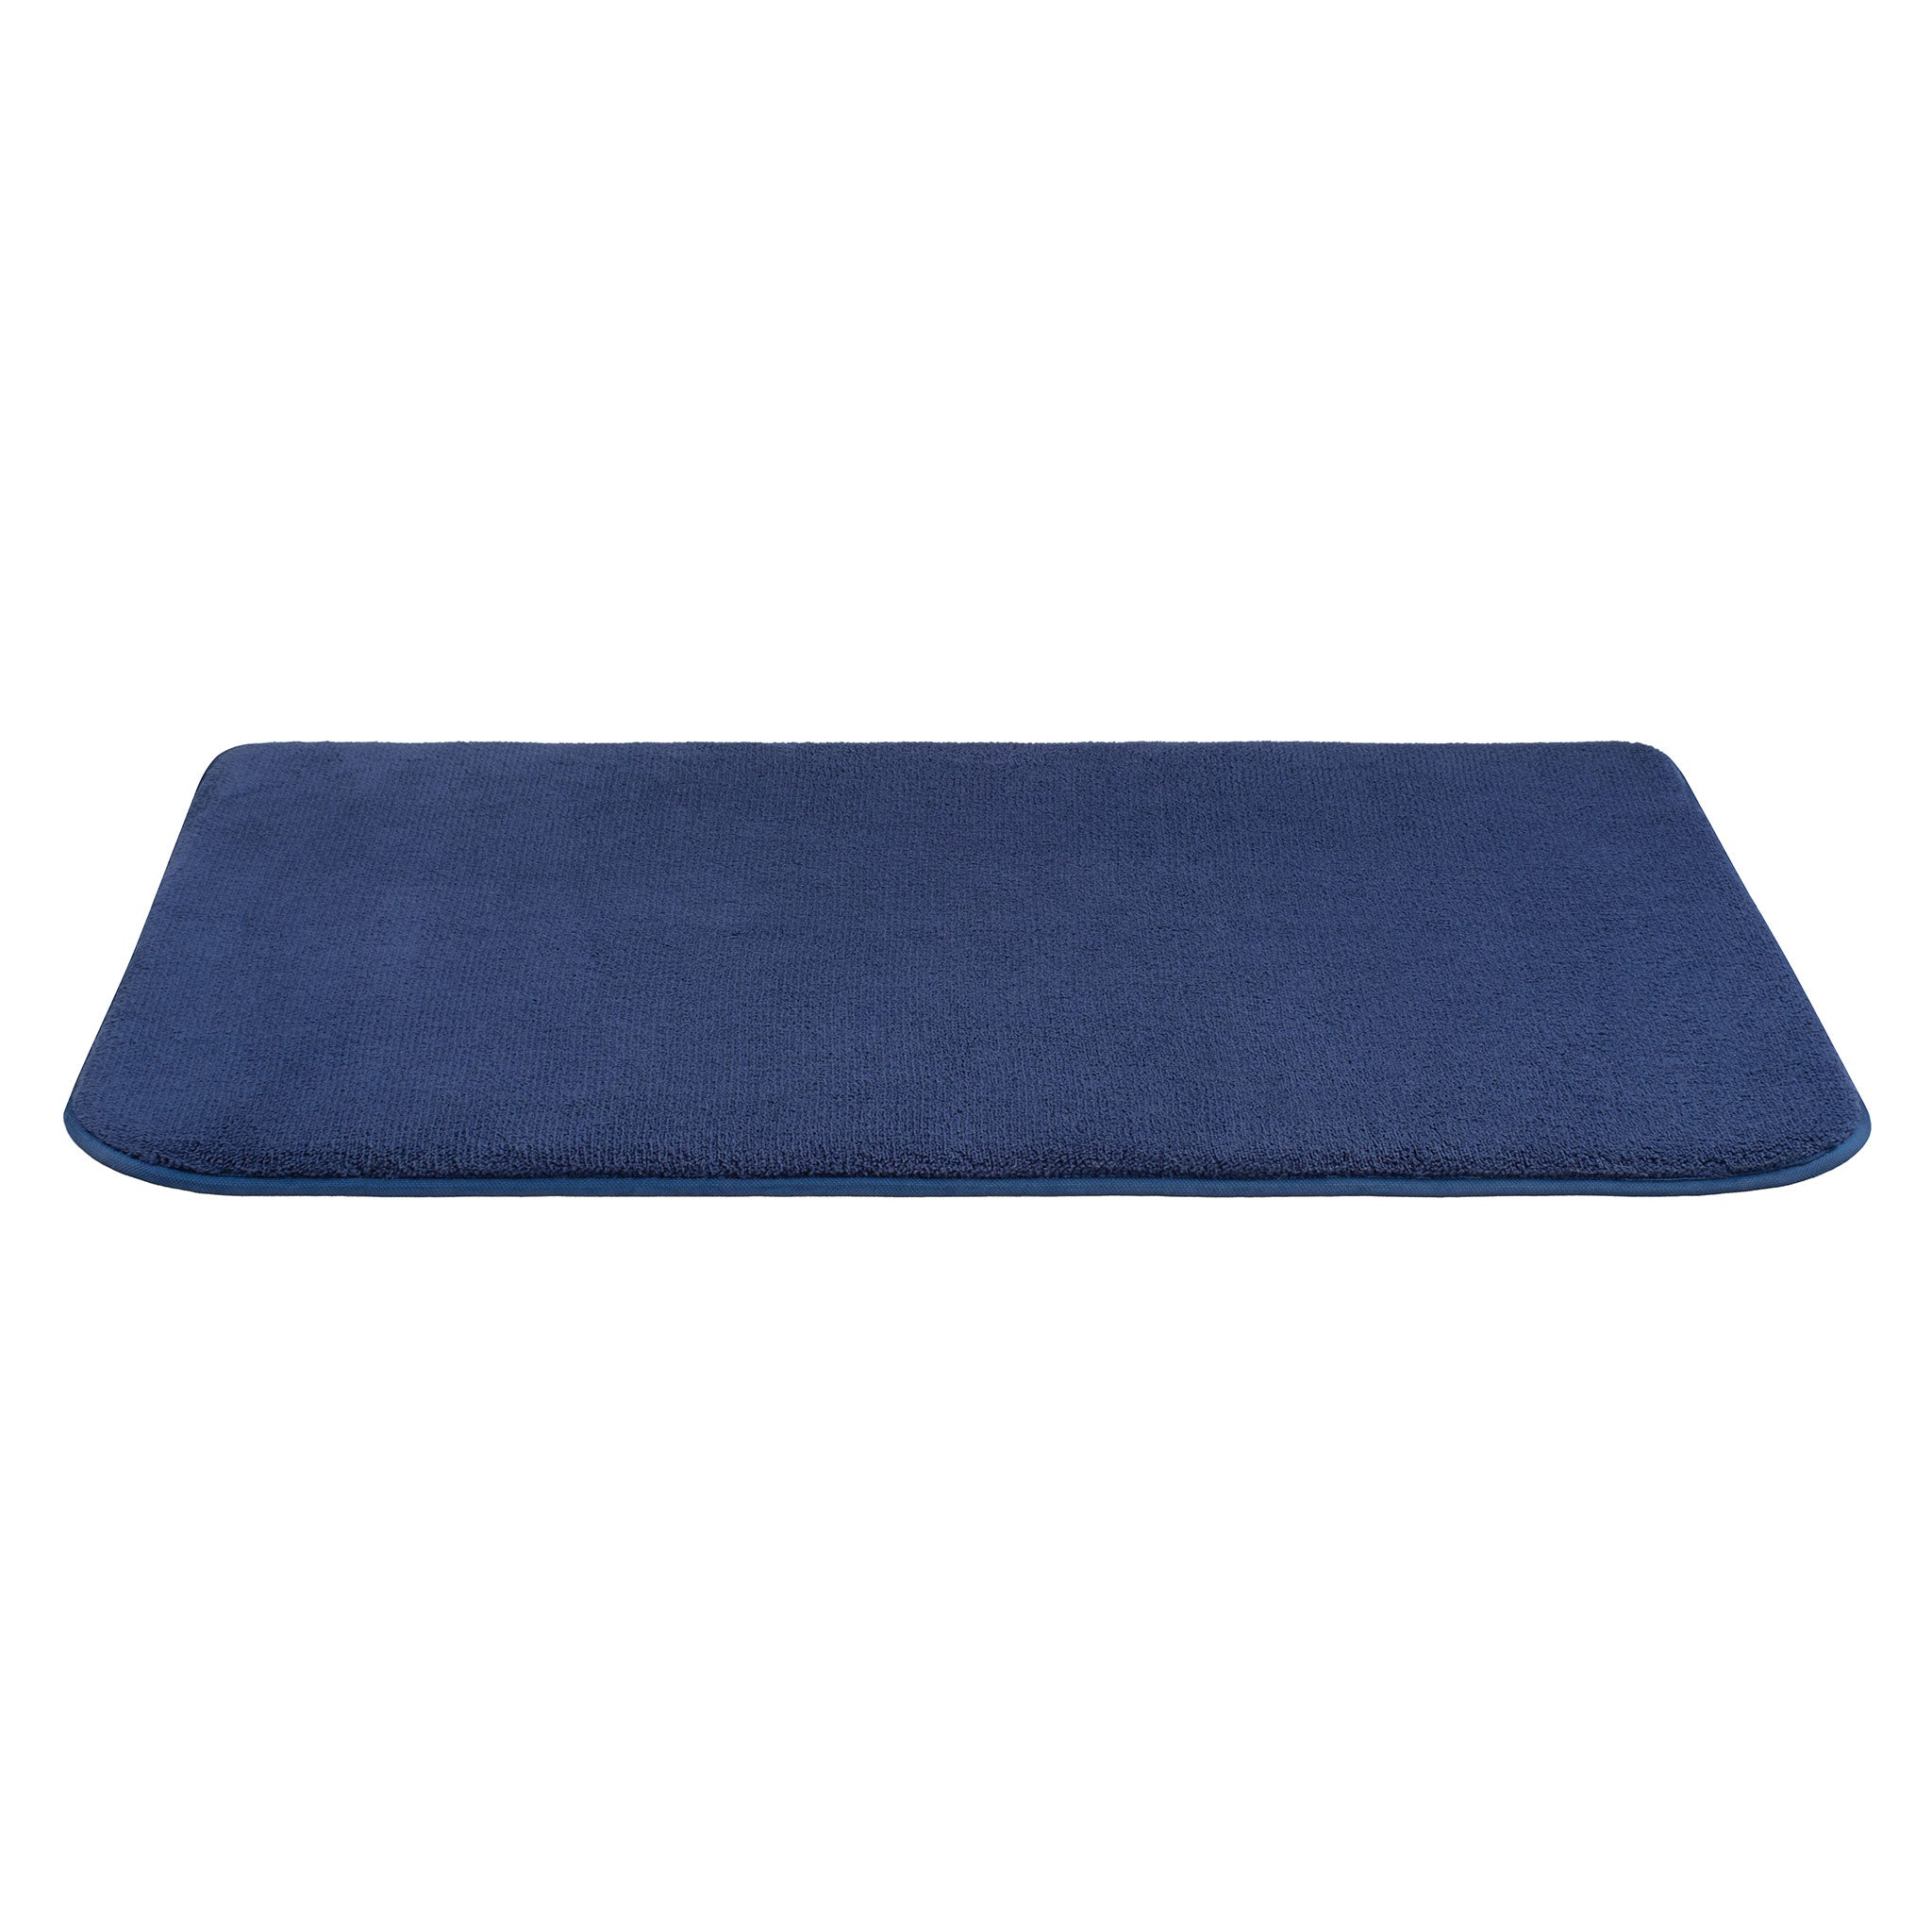 Bath Mat Blue, Rubber Casual Of 27 x 15 Inch For Bathroom Purpose, Pack of  1